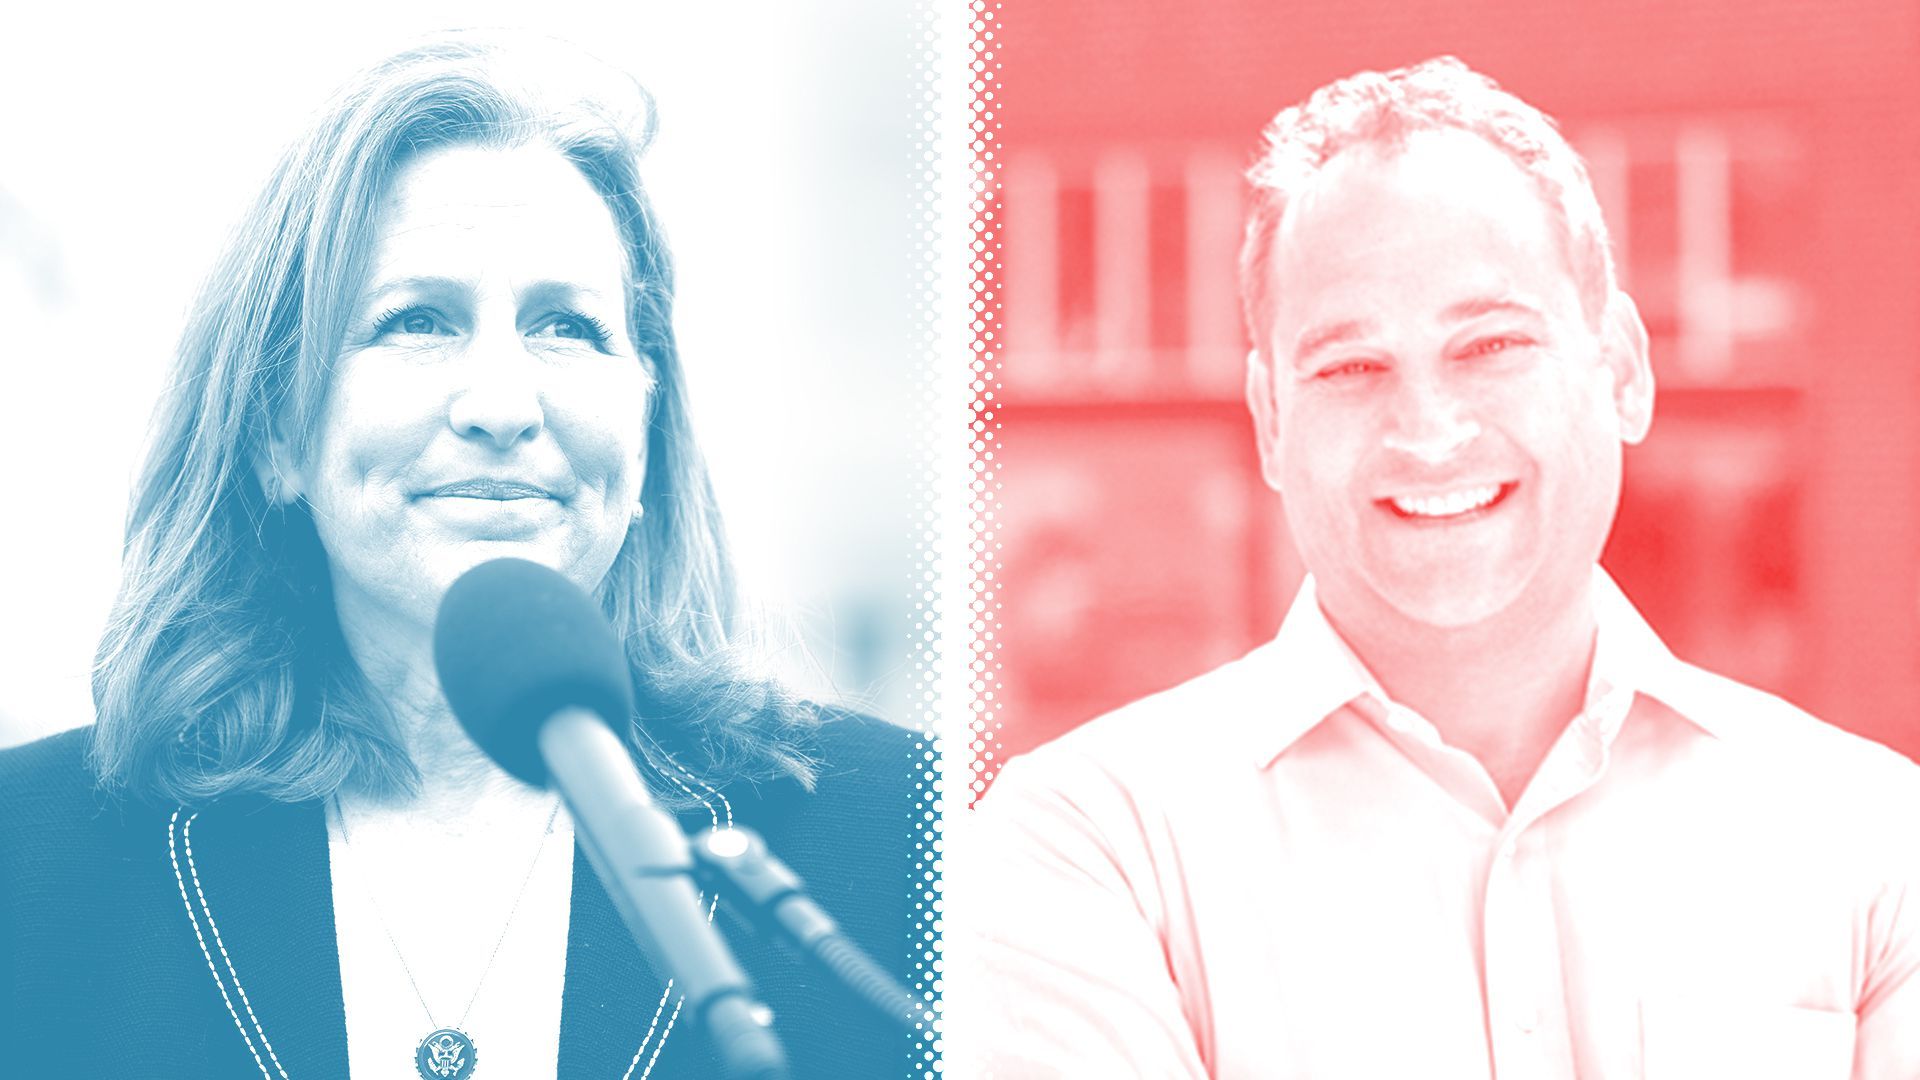 Photo illustration of Kim Schriel, tinted blue, and Matt Larkin, tinted red, separated by a white halftone divider.